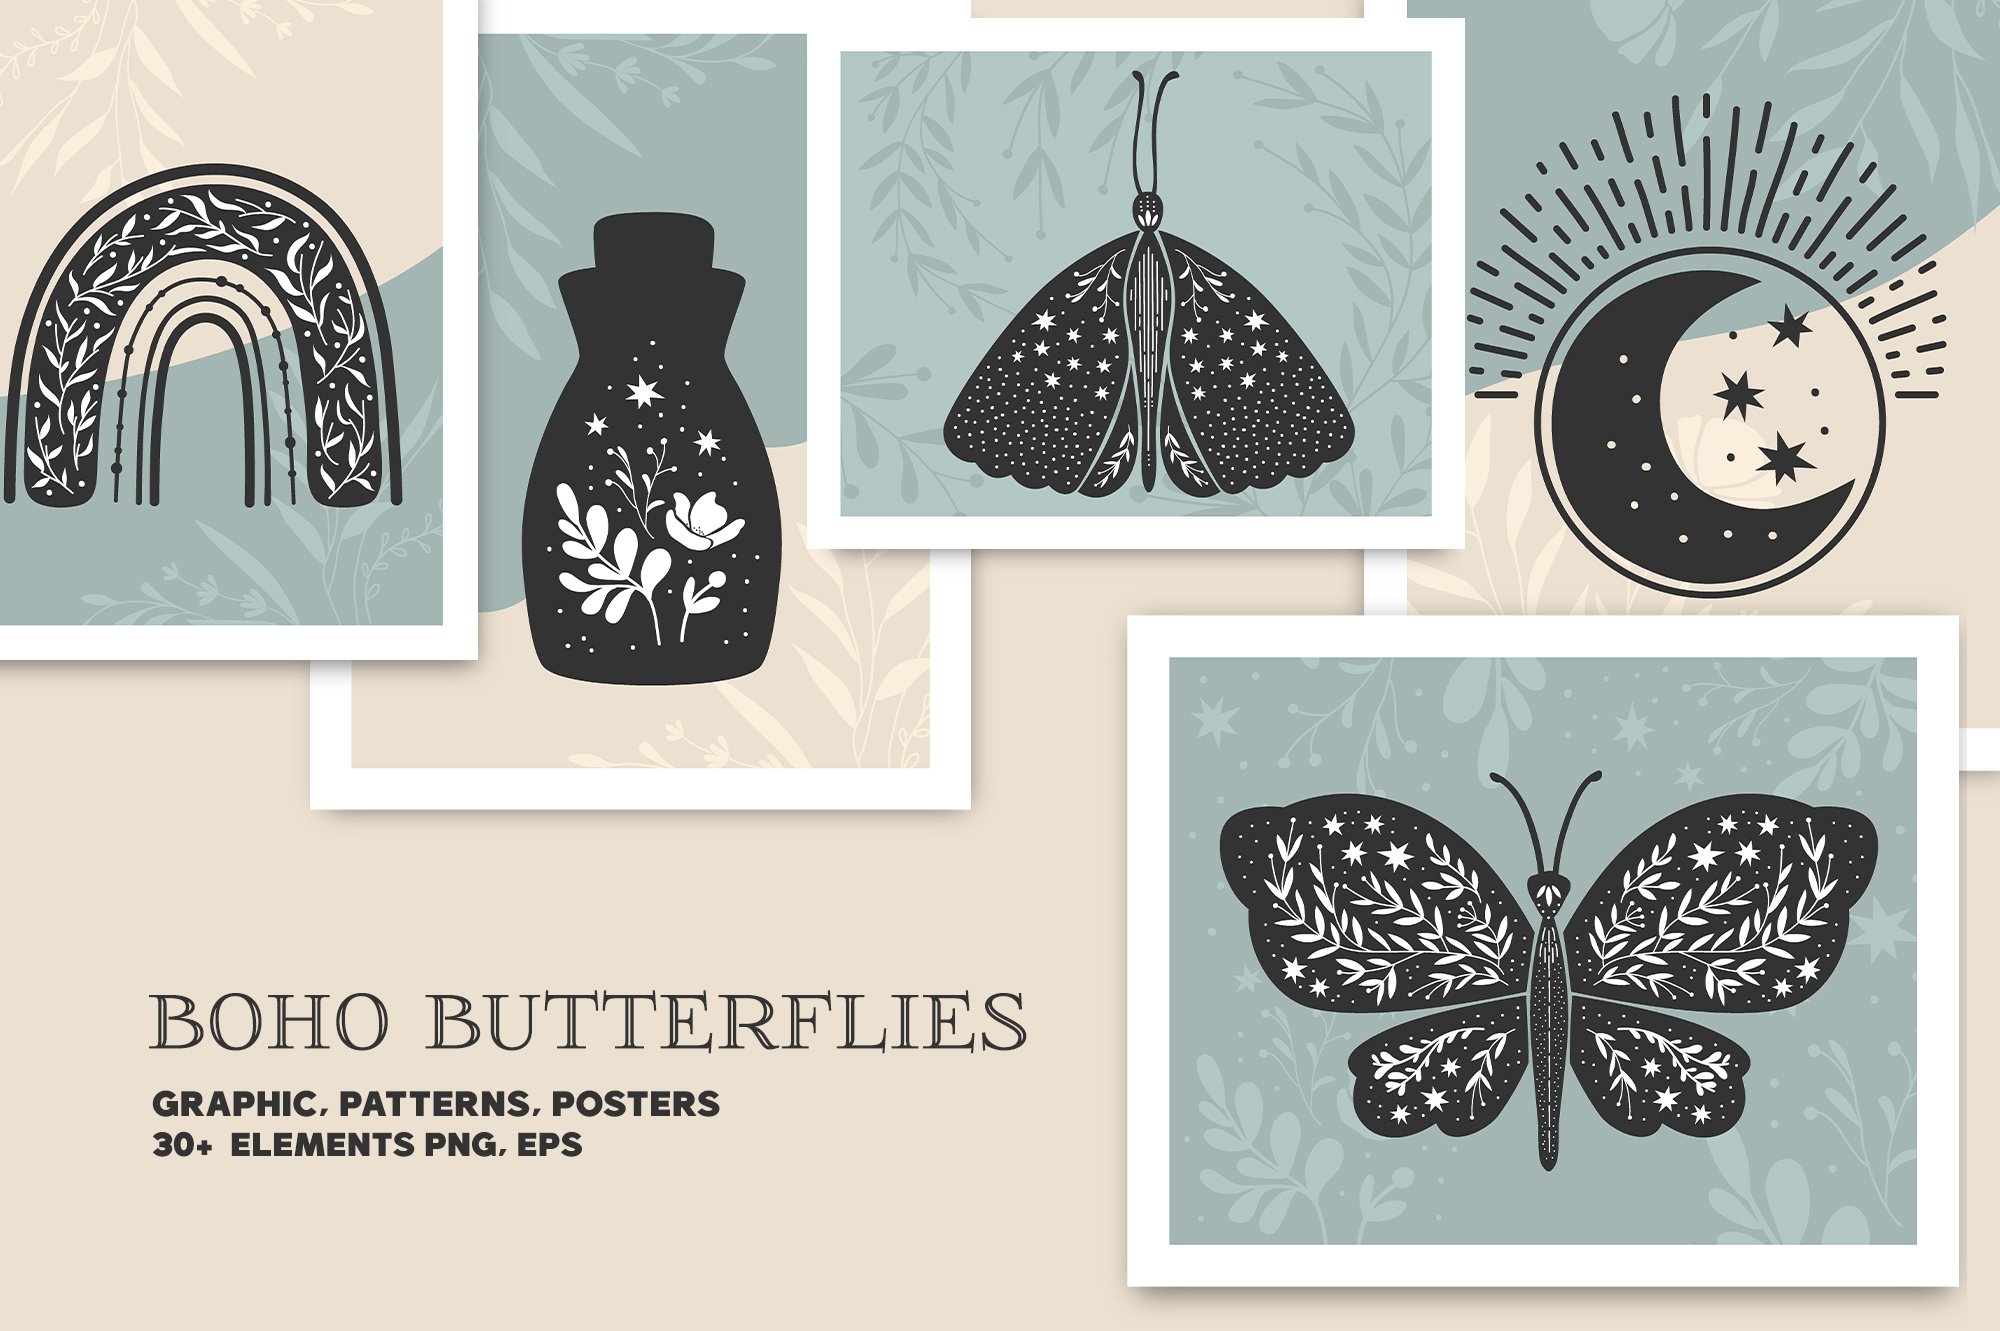 Boho Butterflies Vector Graphics cover image.